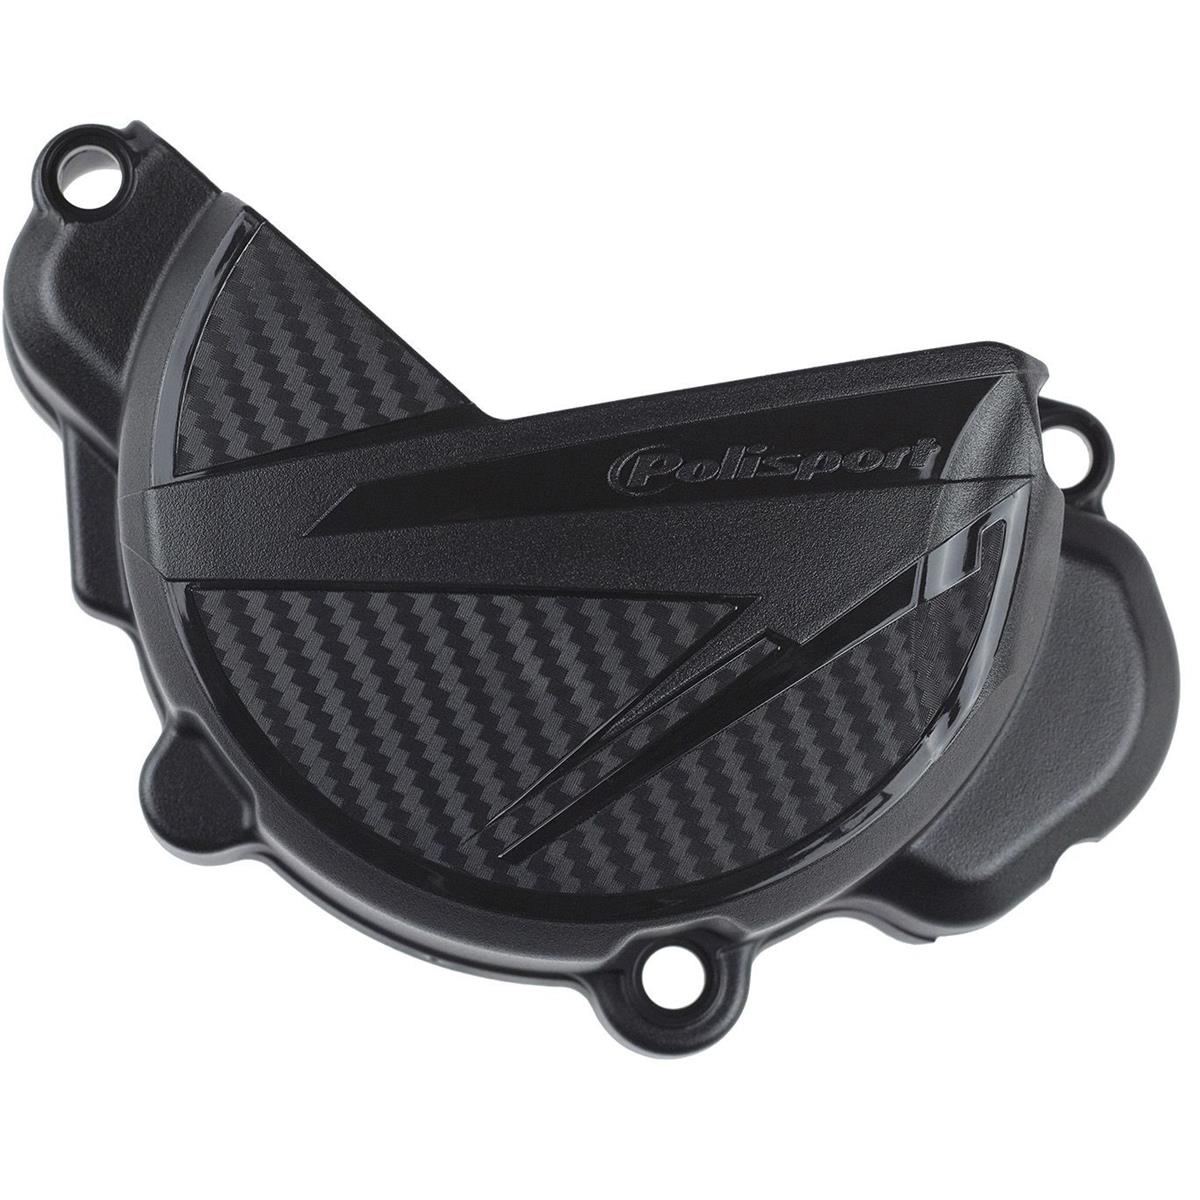 Polisport Ignition cover protector  KTM EXC-F 250 09-11